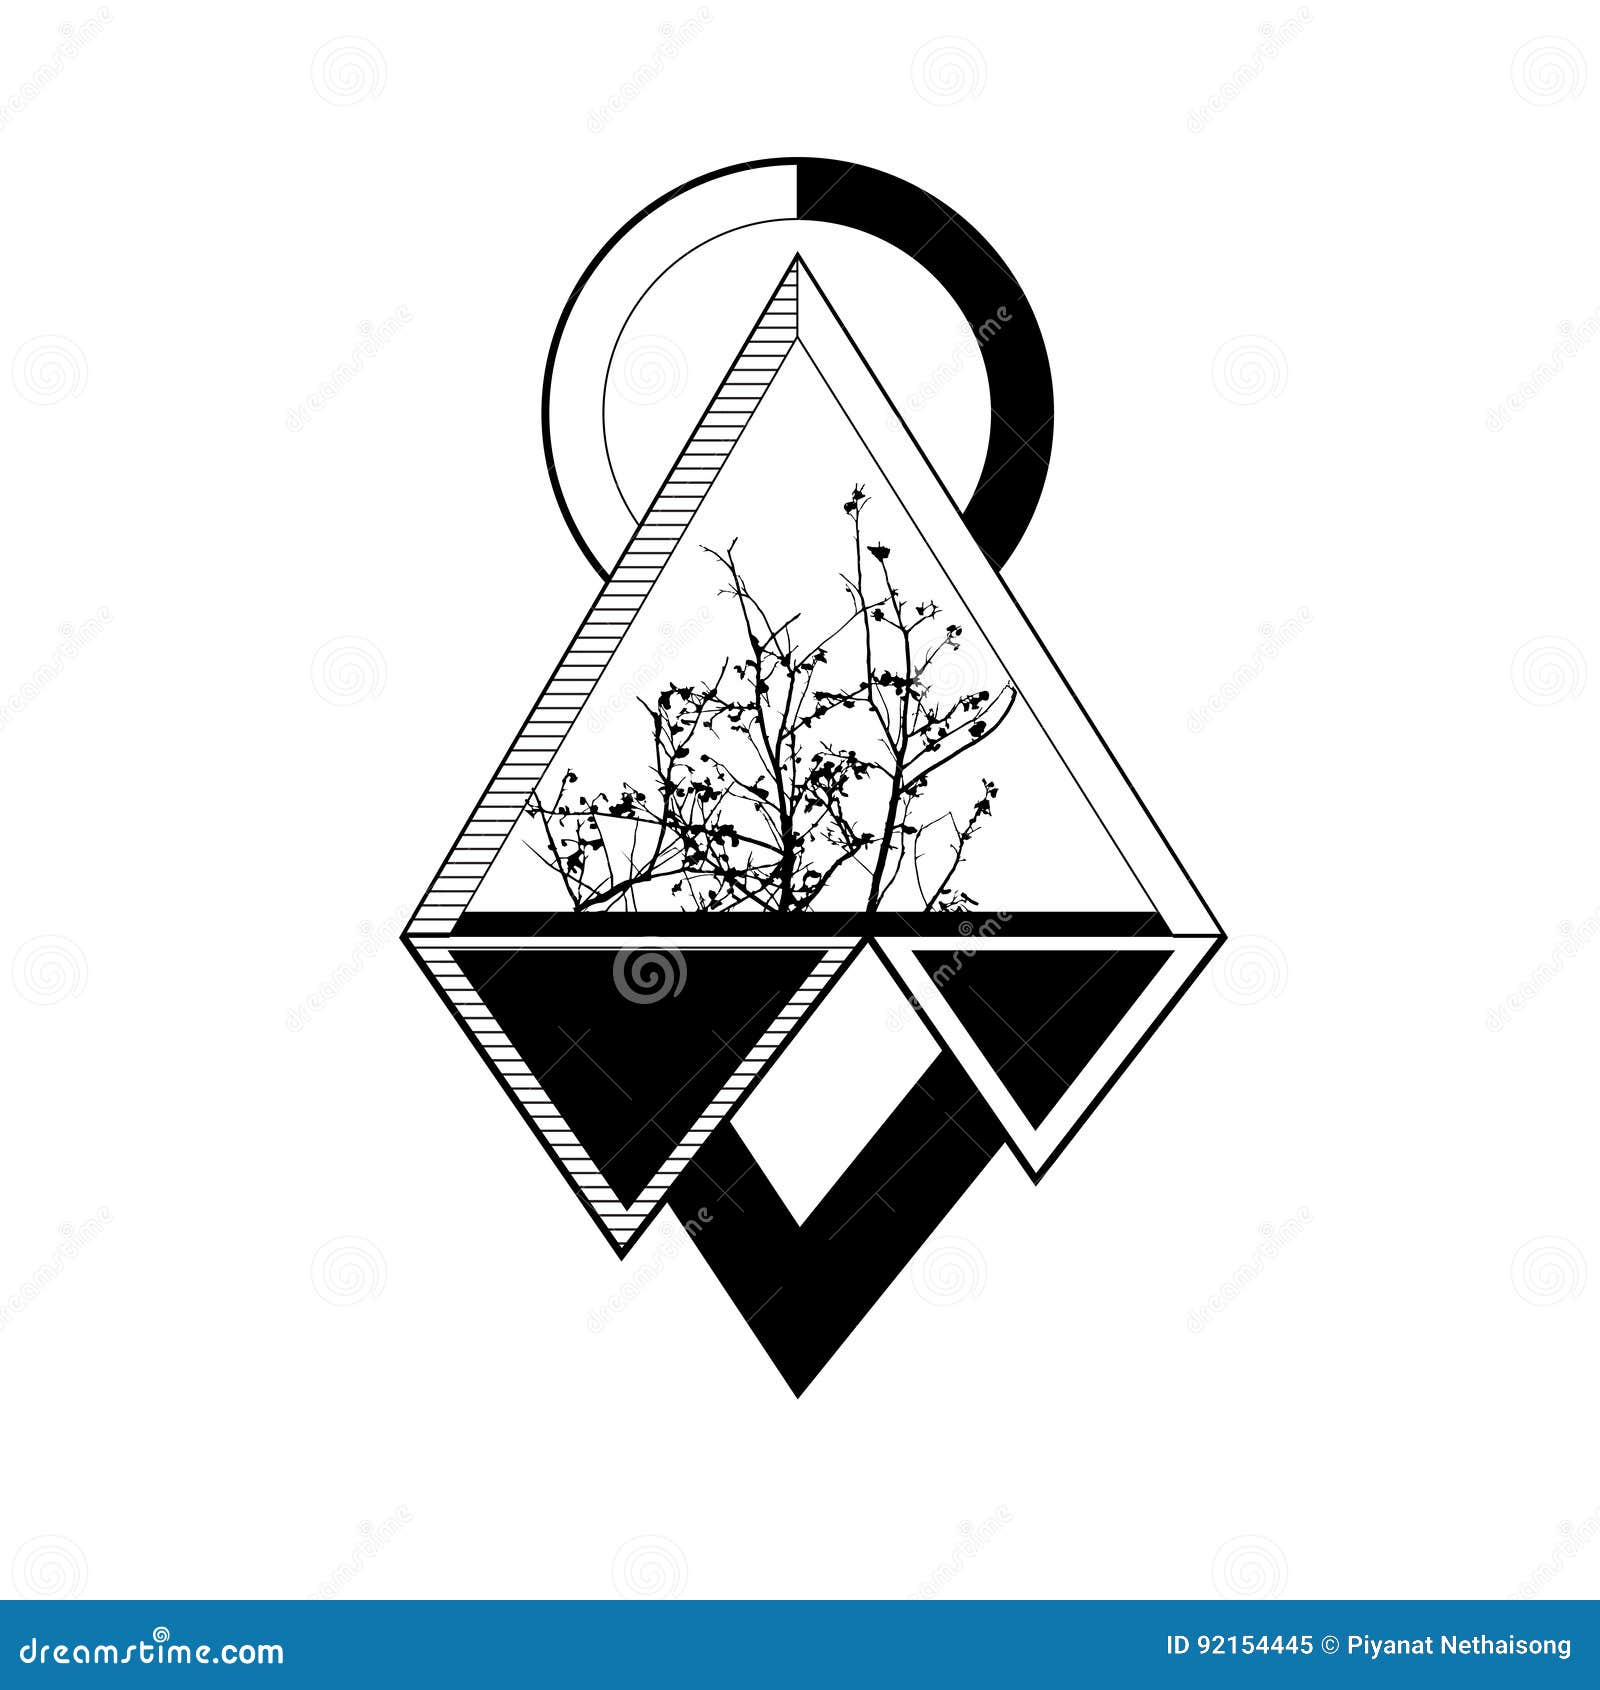 Abstract Geometry Wolf Design Tattoo Triangle Background Vector Image Stock  Illustration - Download Image Now - iStock